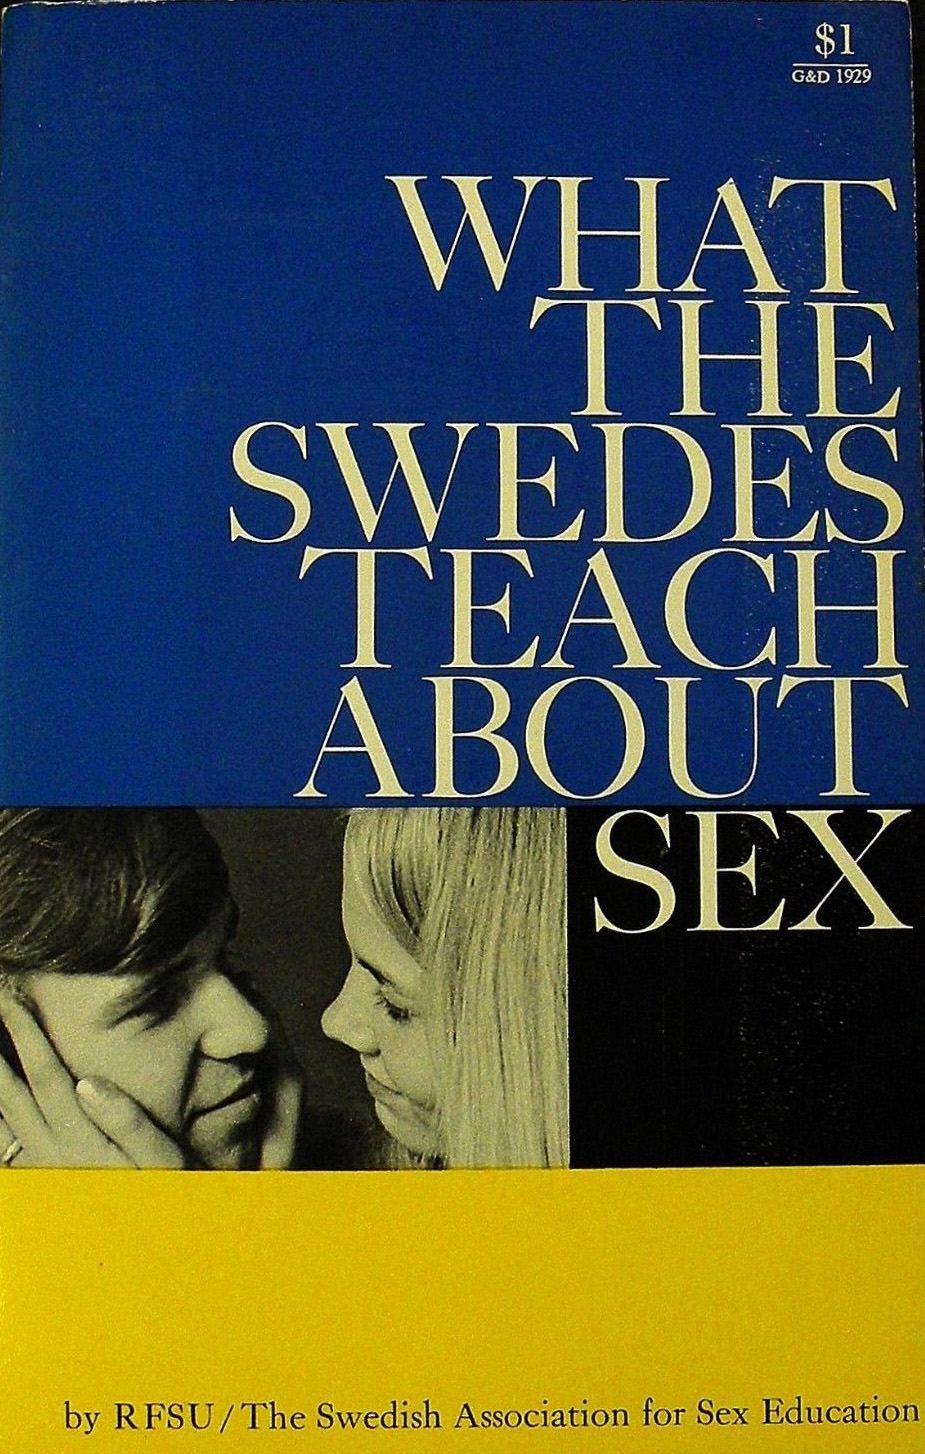 WHAT THE SWEDES TEACH ABOUT SEX by RFSU / The Swedish Association for Sex Education Ridge Press, 1970